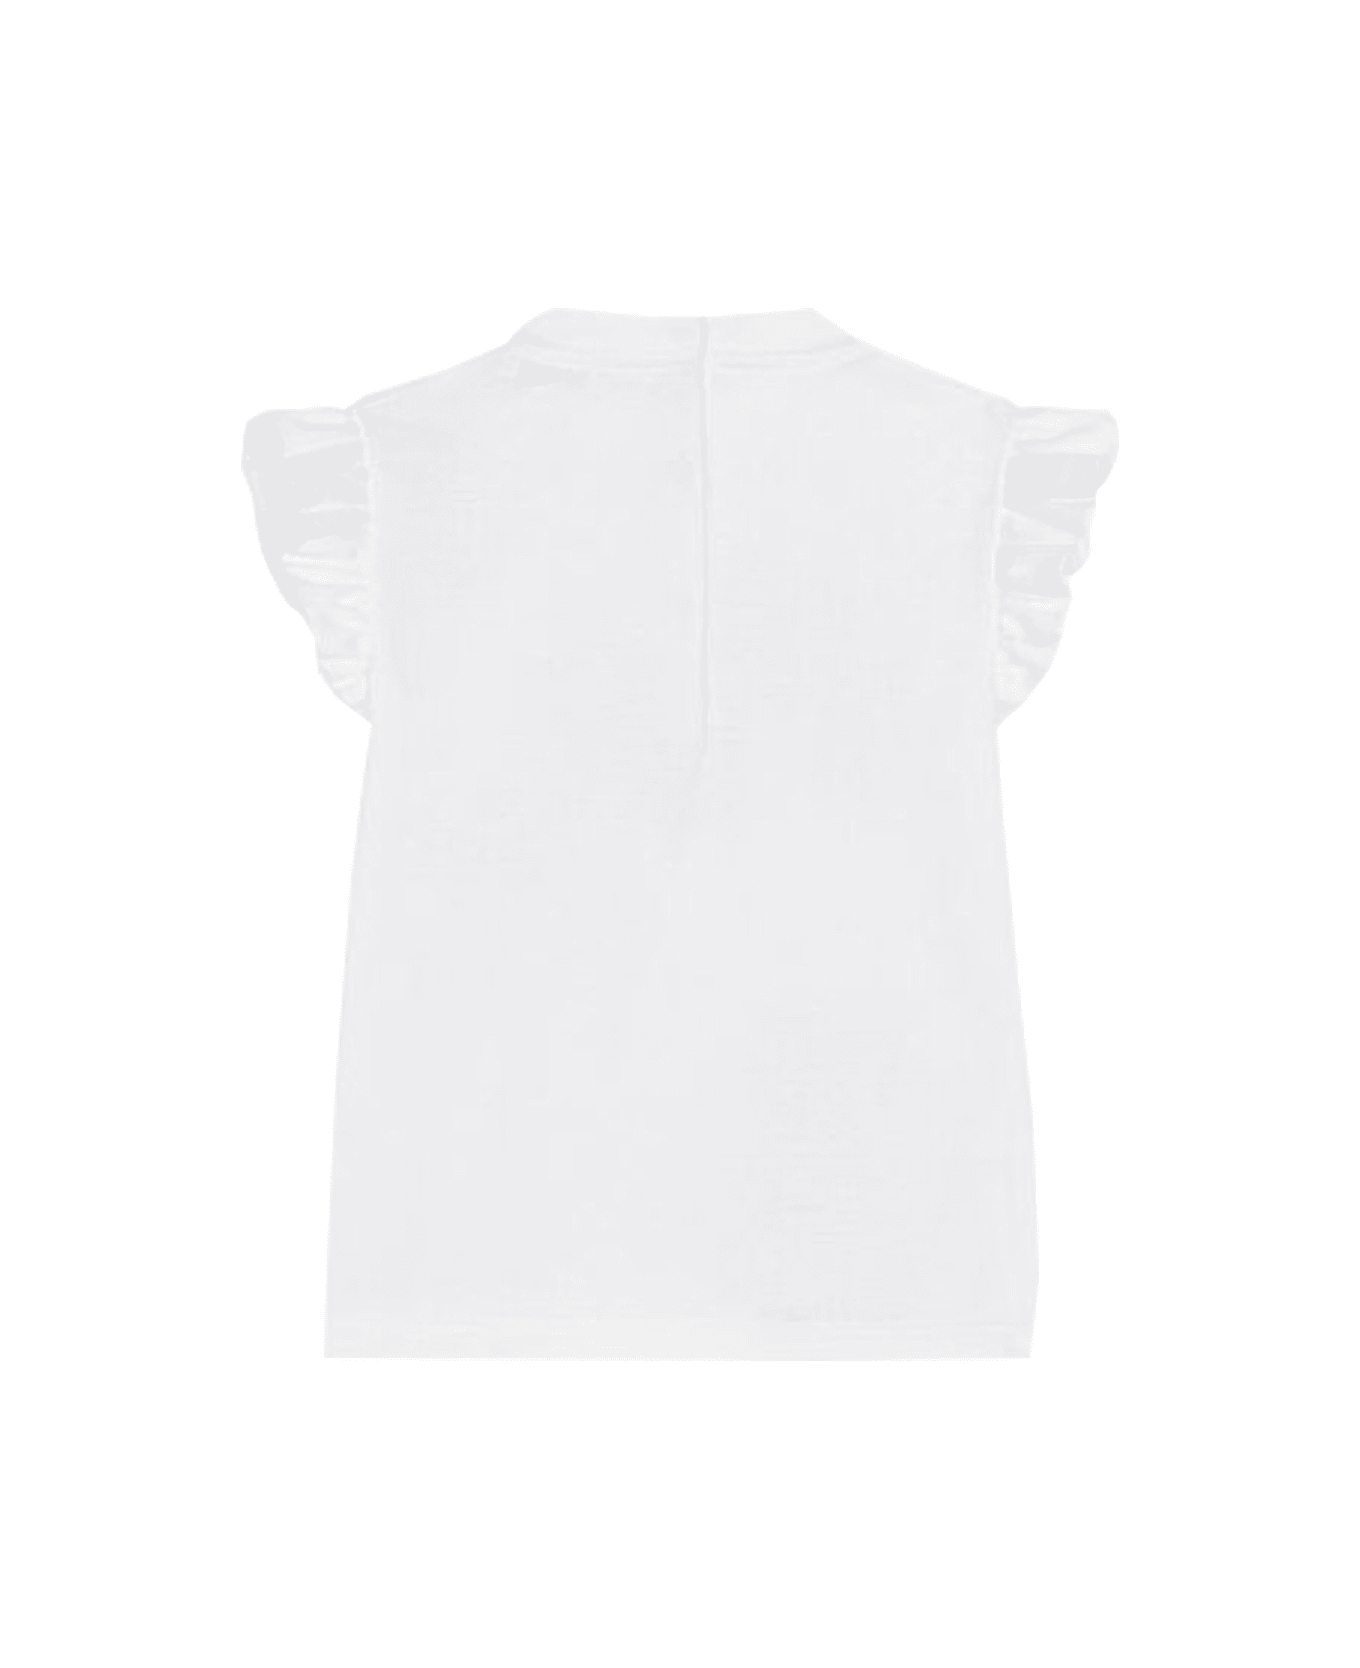 Dolce & Gabbana Jersey T-shirt With Flower Print And Dg Logo - White